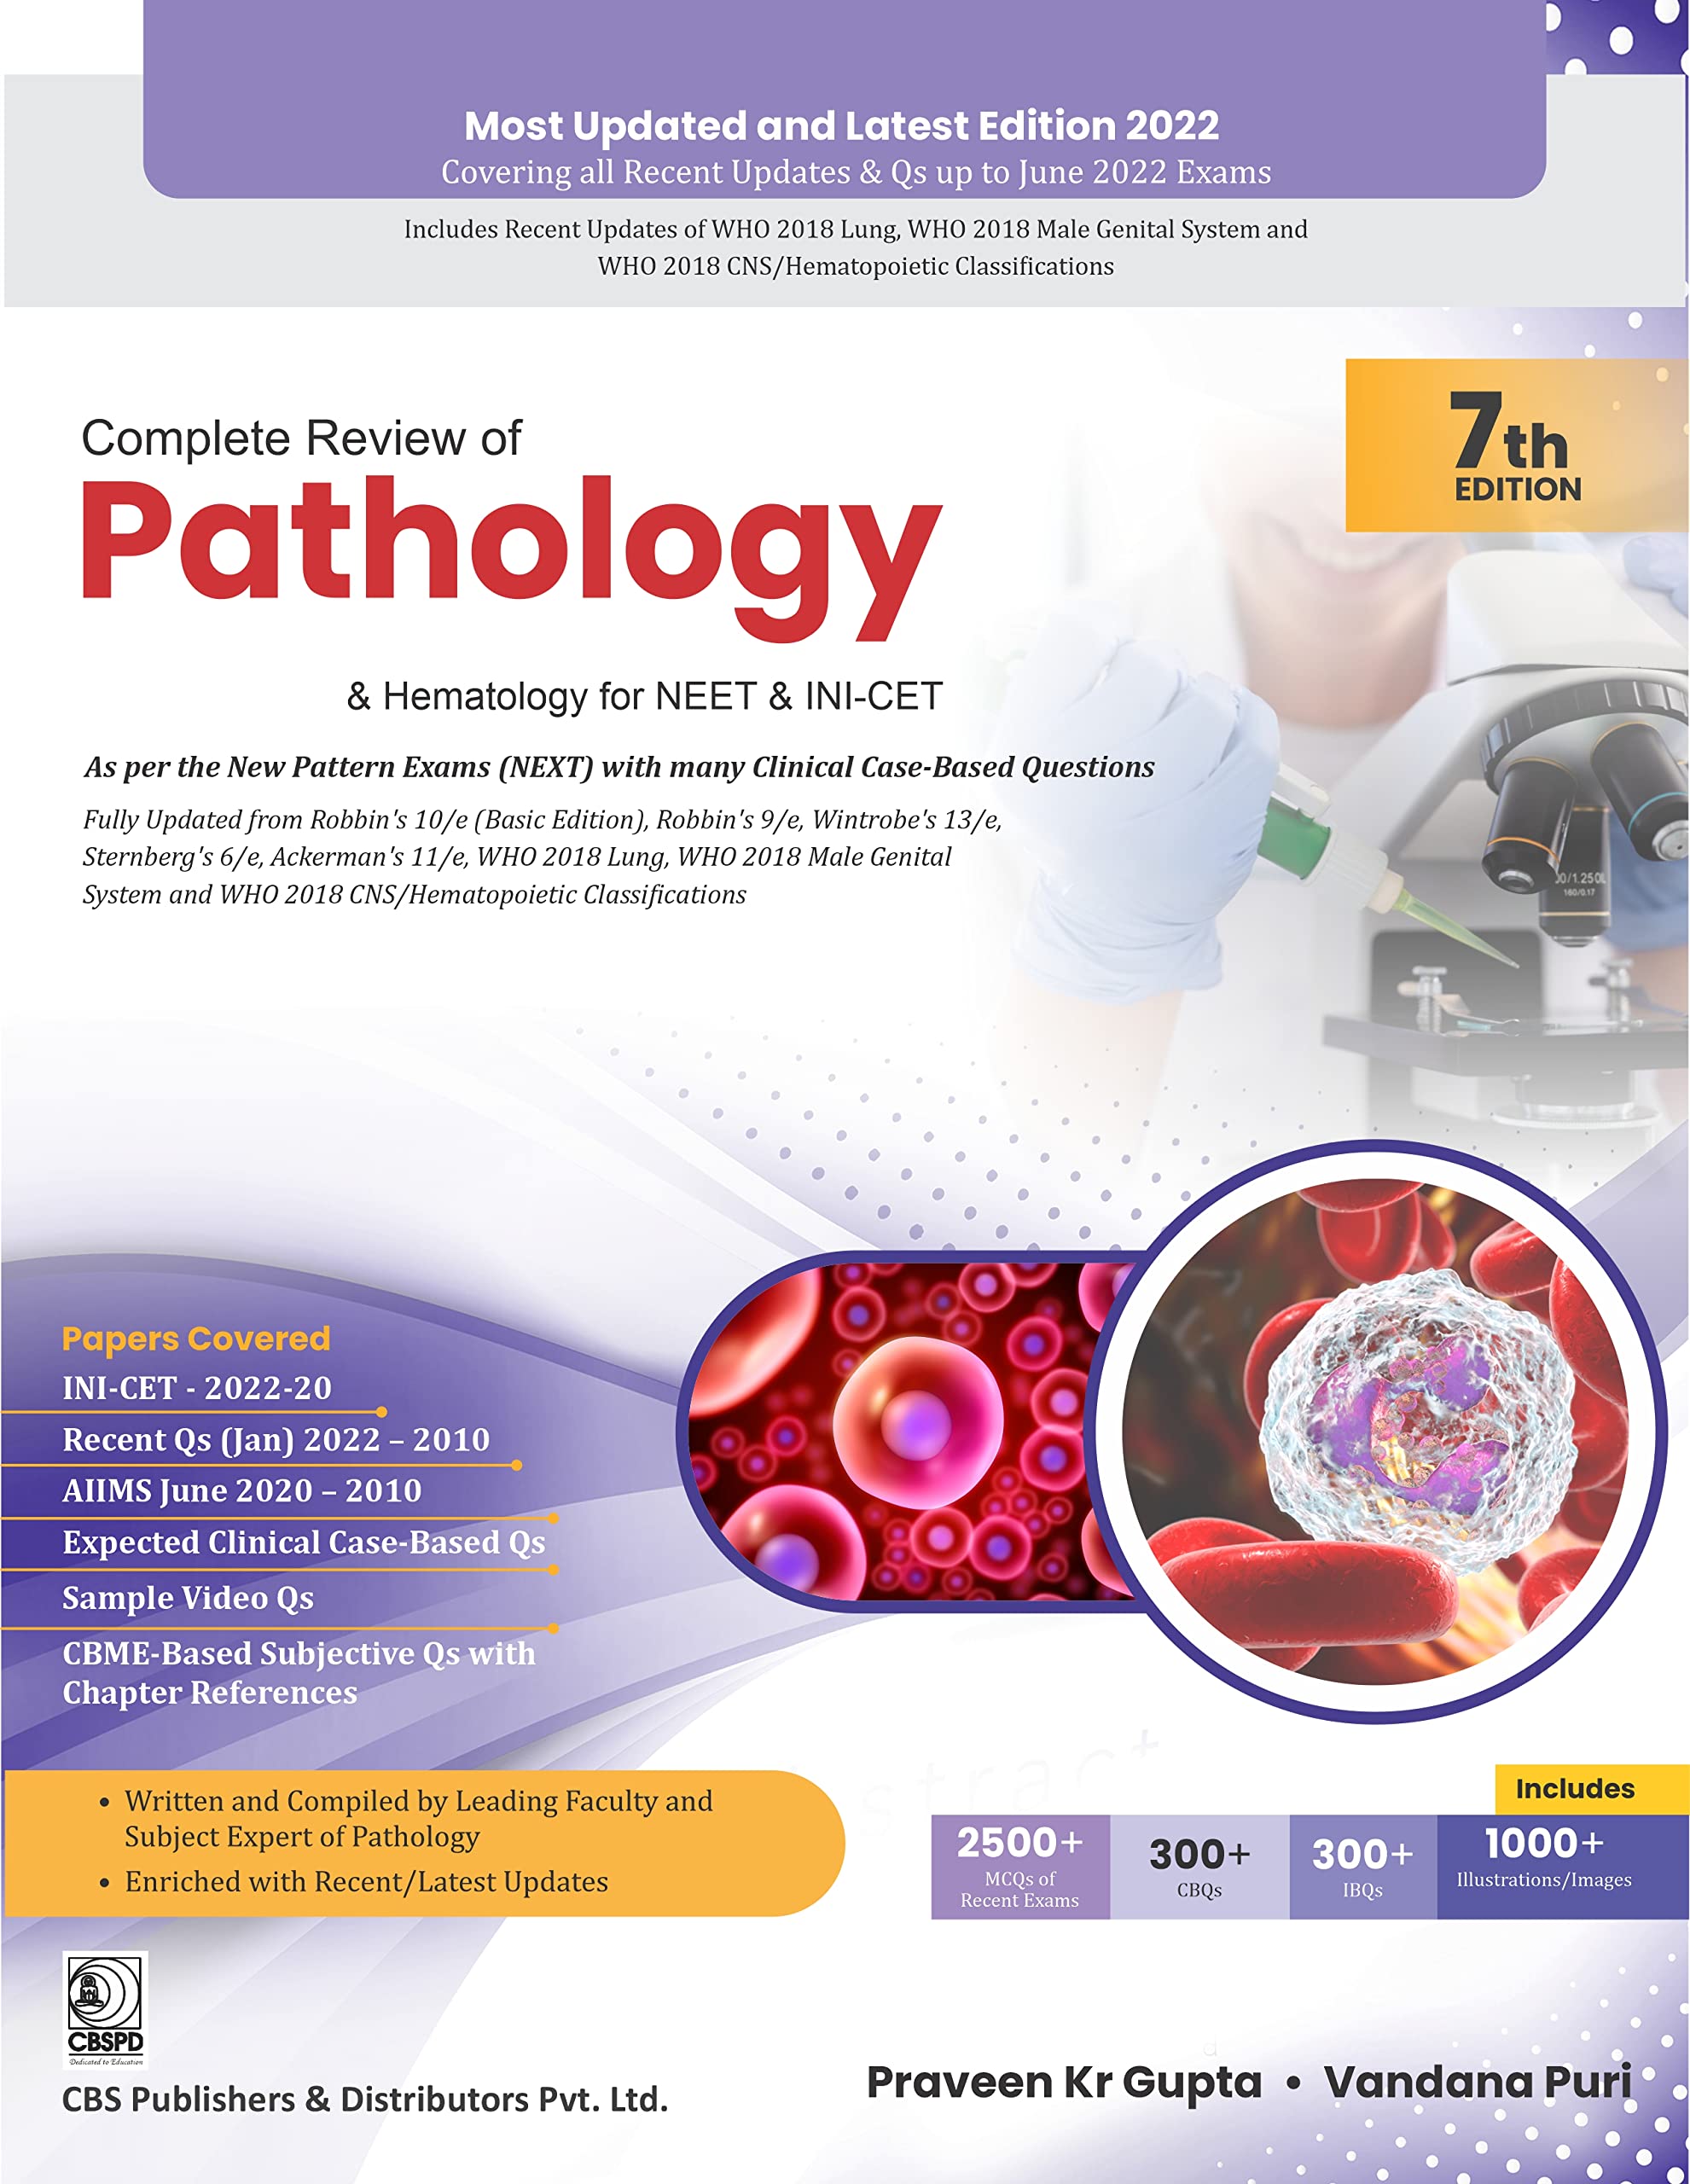 Complete Review of Pathology & Hematology for NEET & INI-CET 7th Ed